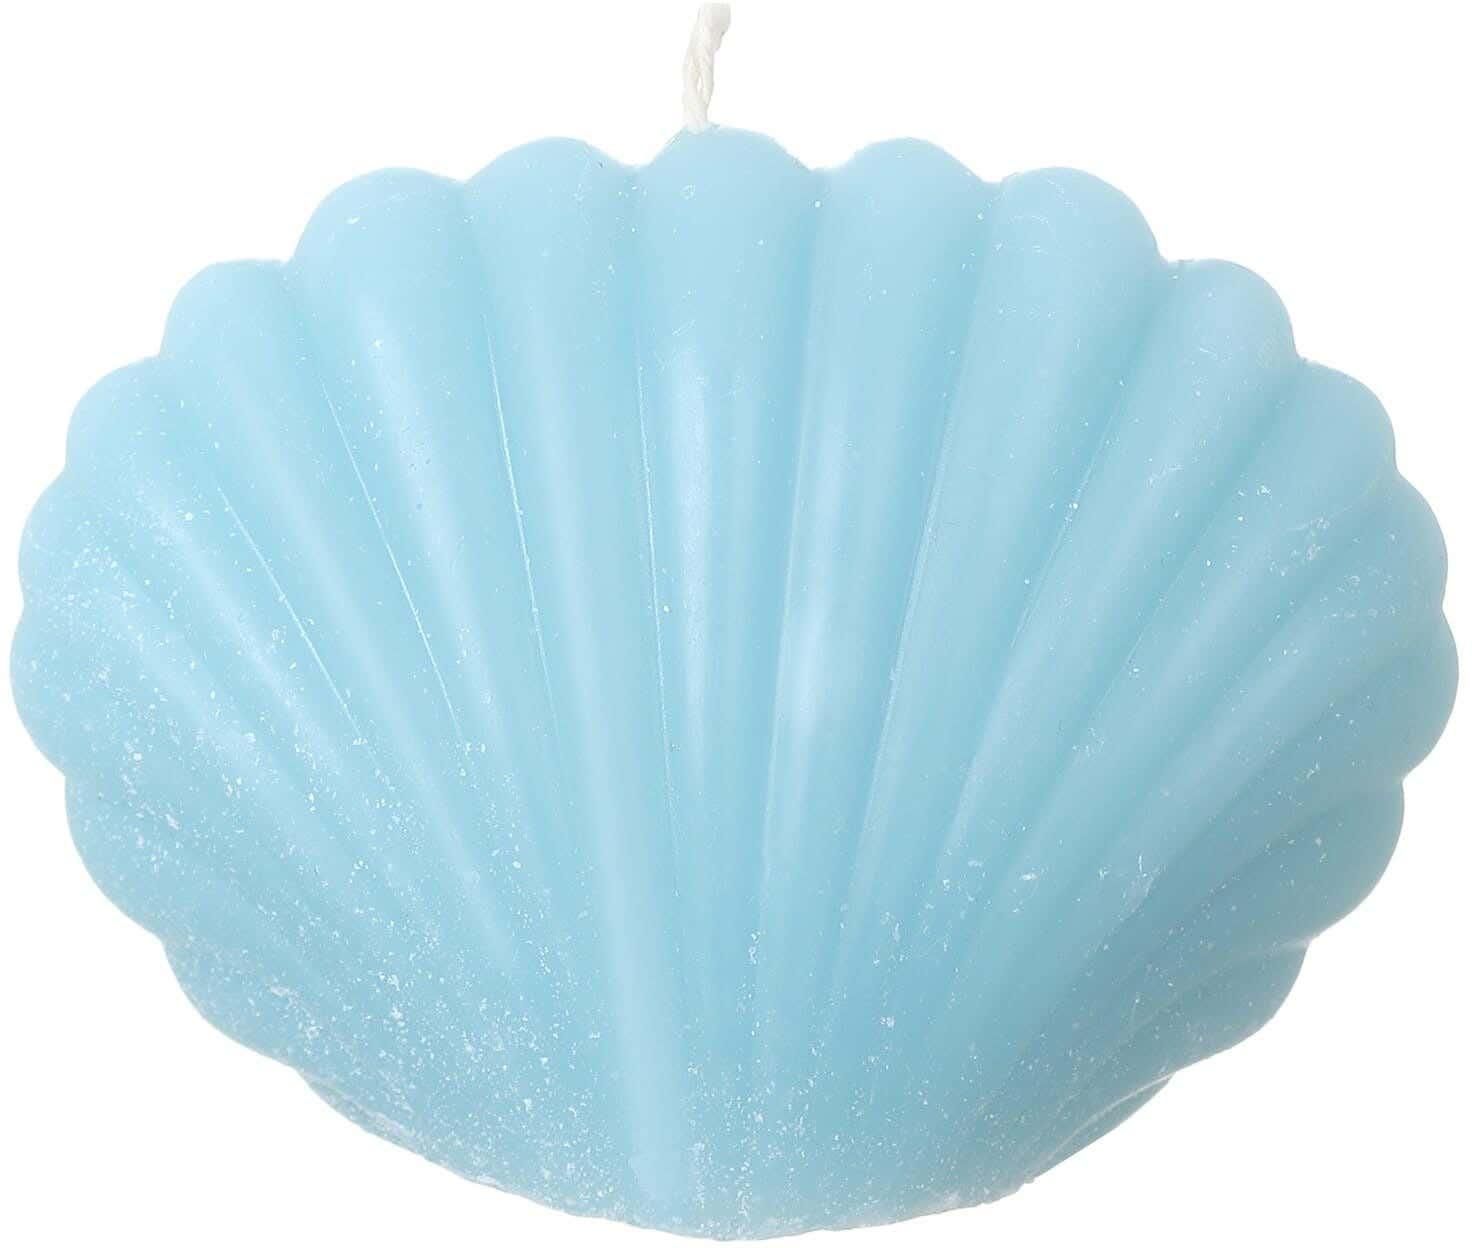 Get Scented Candle Shape of Bowl, 9×7 cm - Turquoise with best offers | Raneen.com